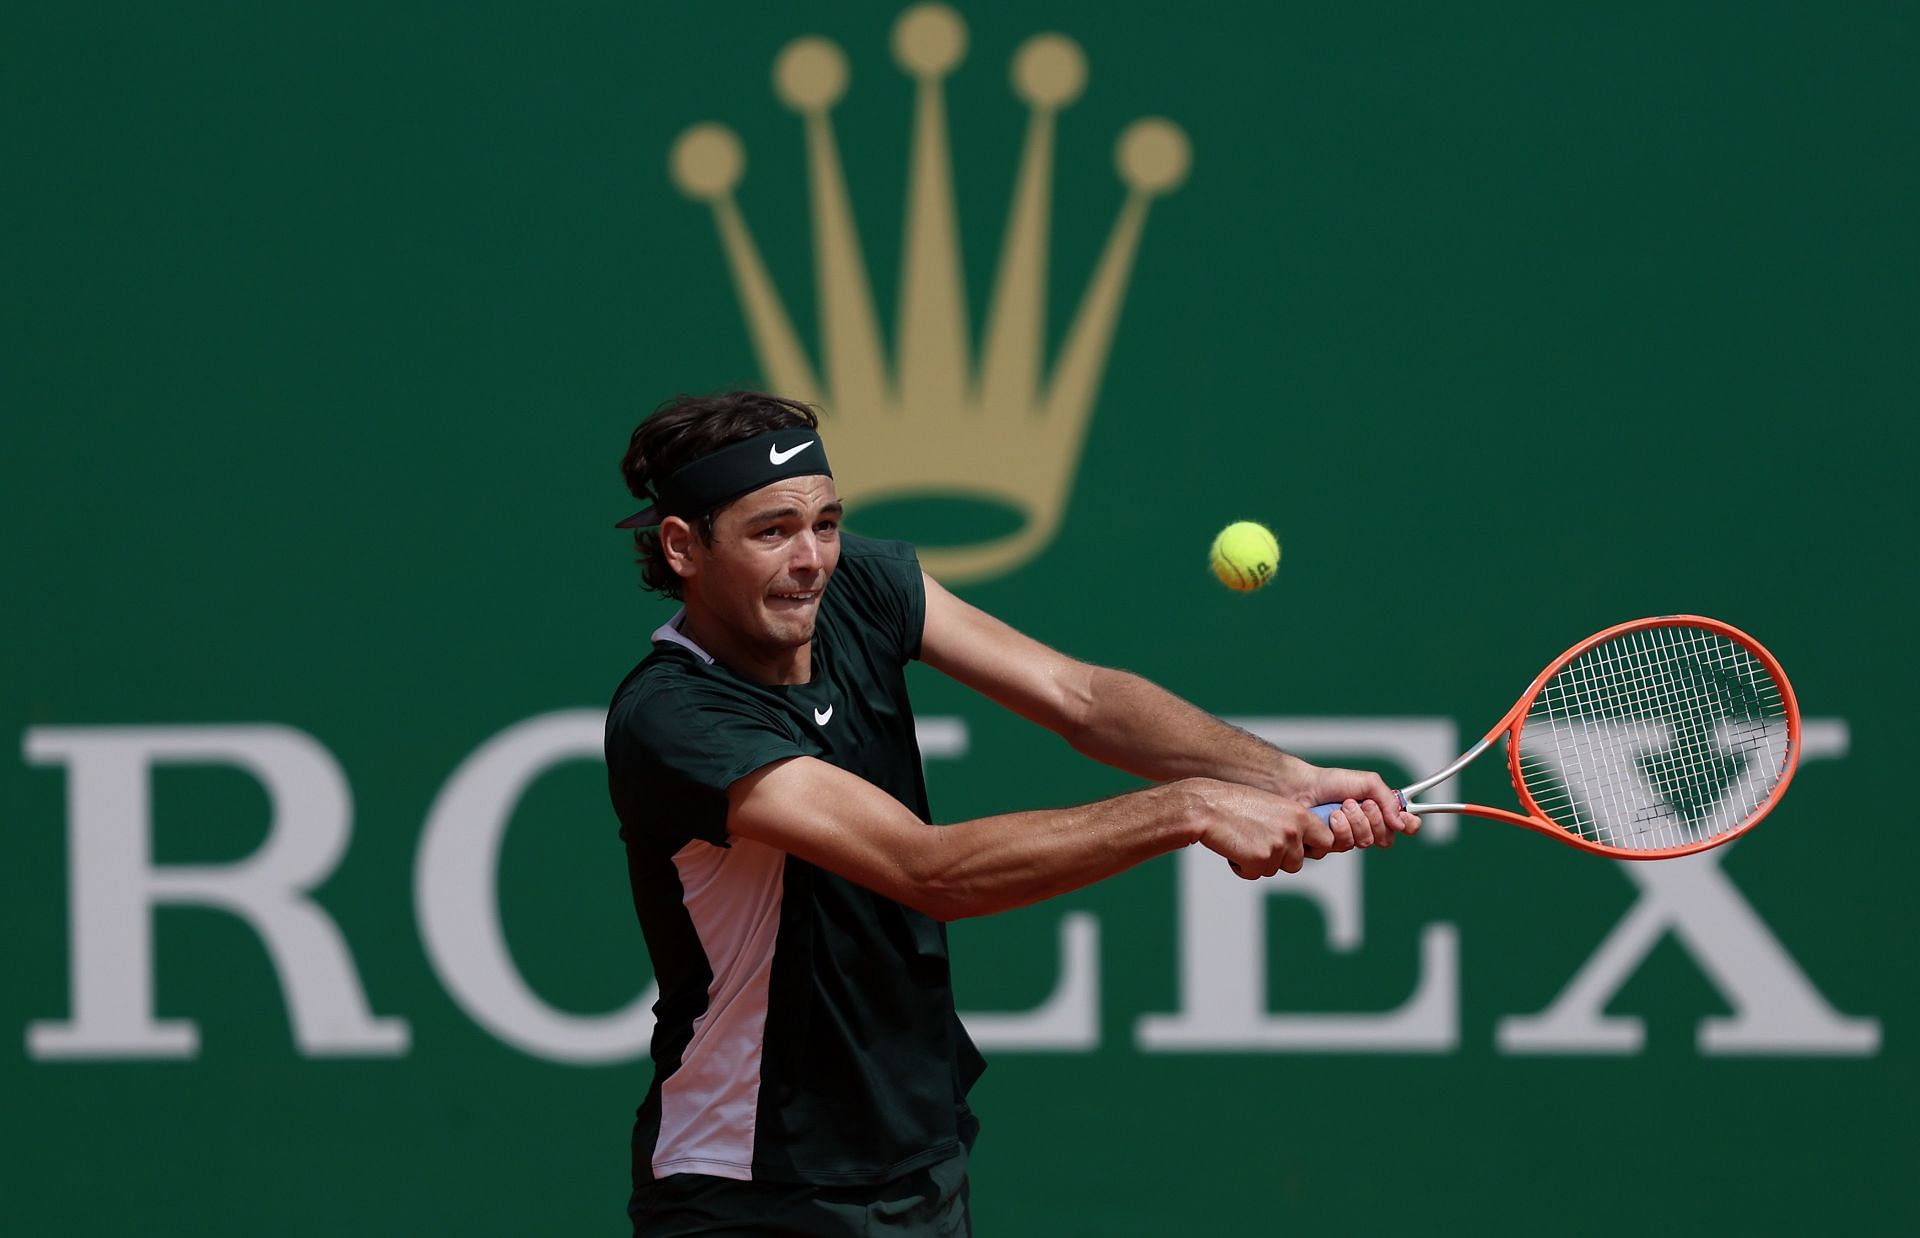 Taylor Fritz takes on Sebastian Korda in the third round of the 2022 Monte-Carlo Masters